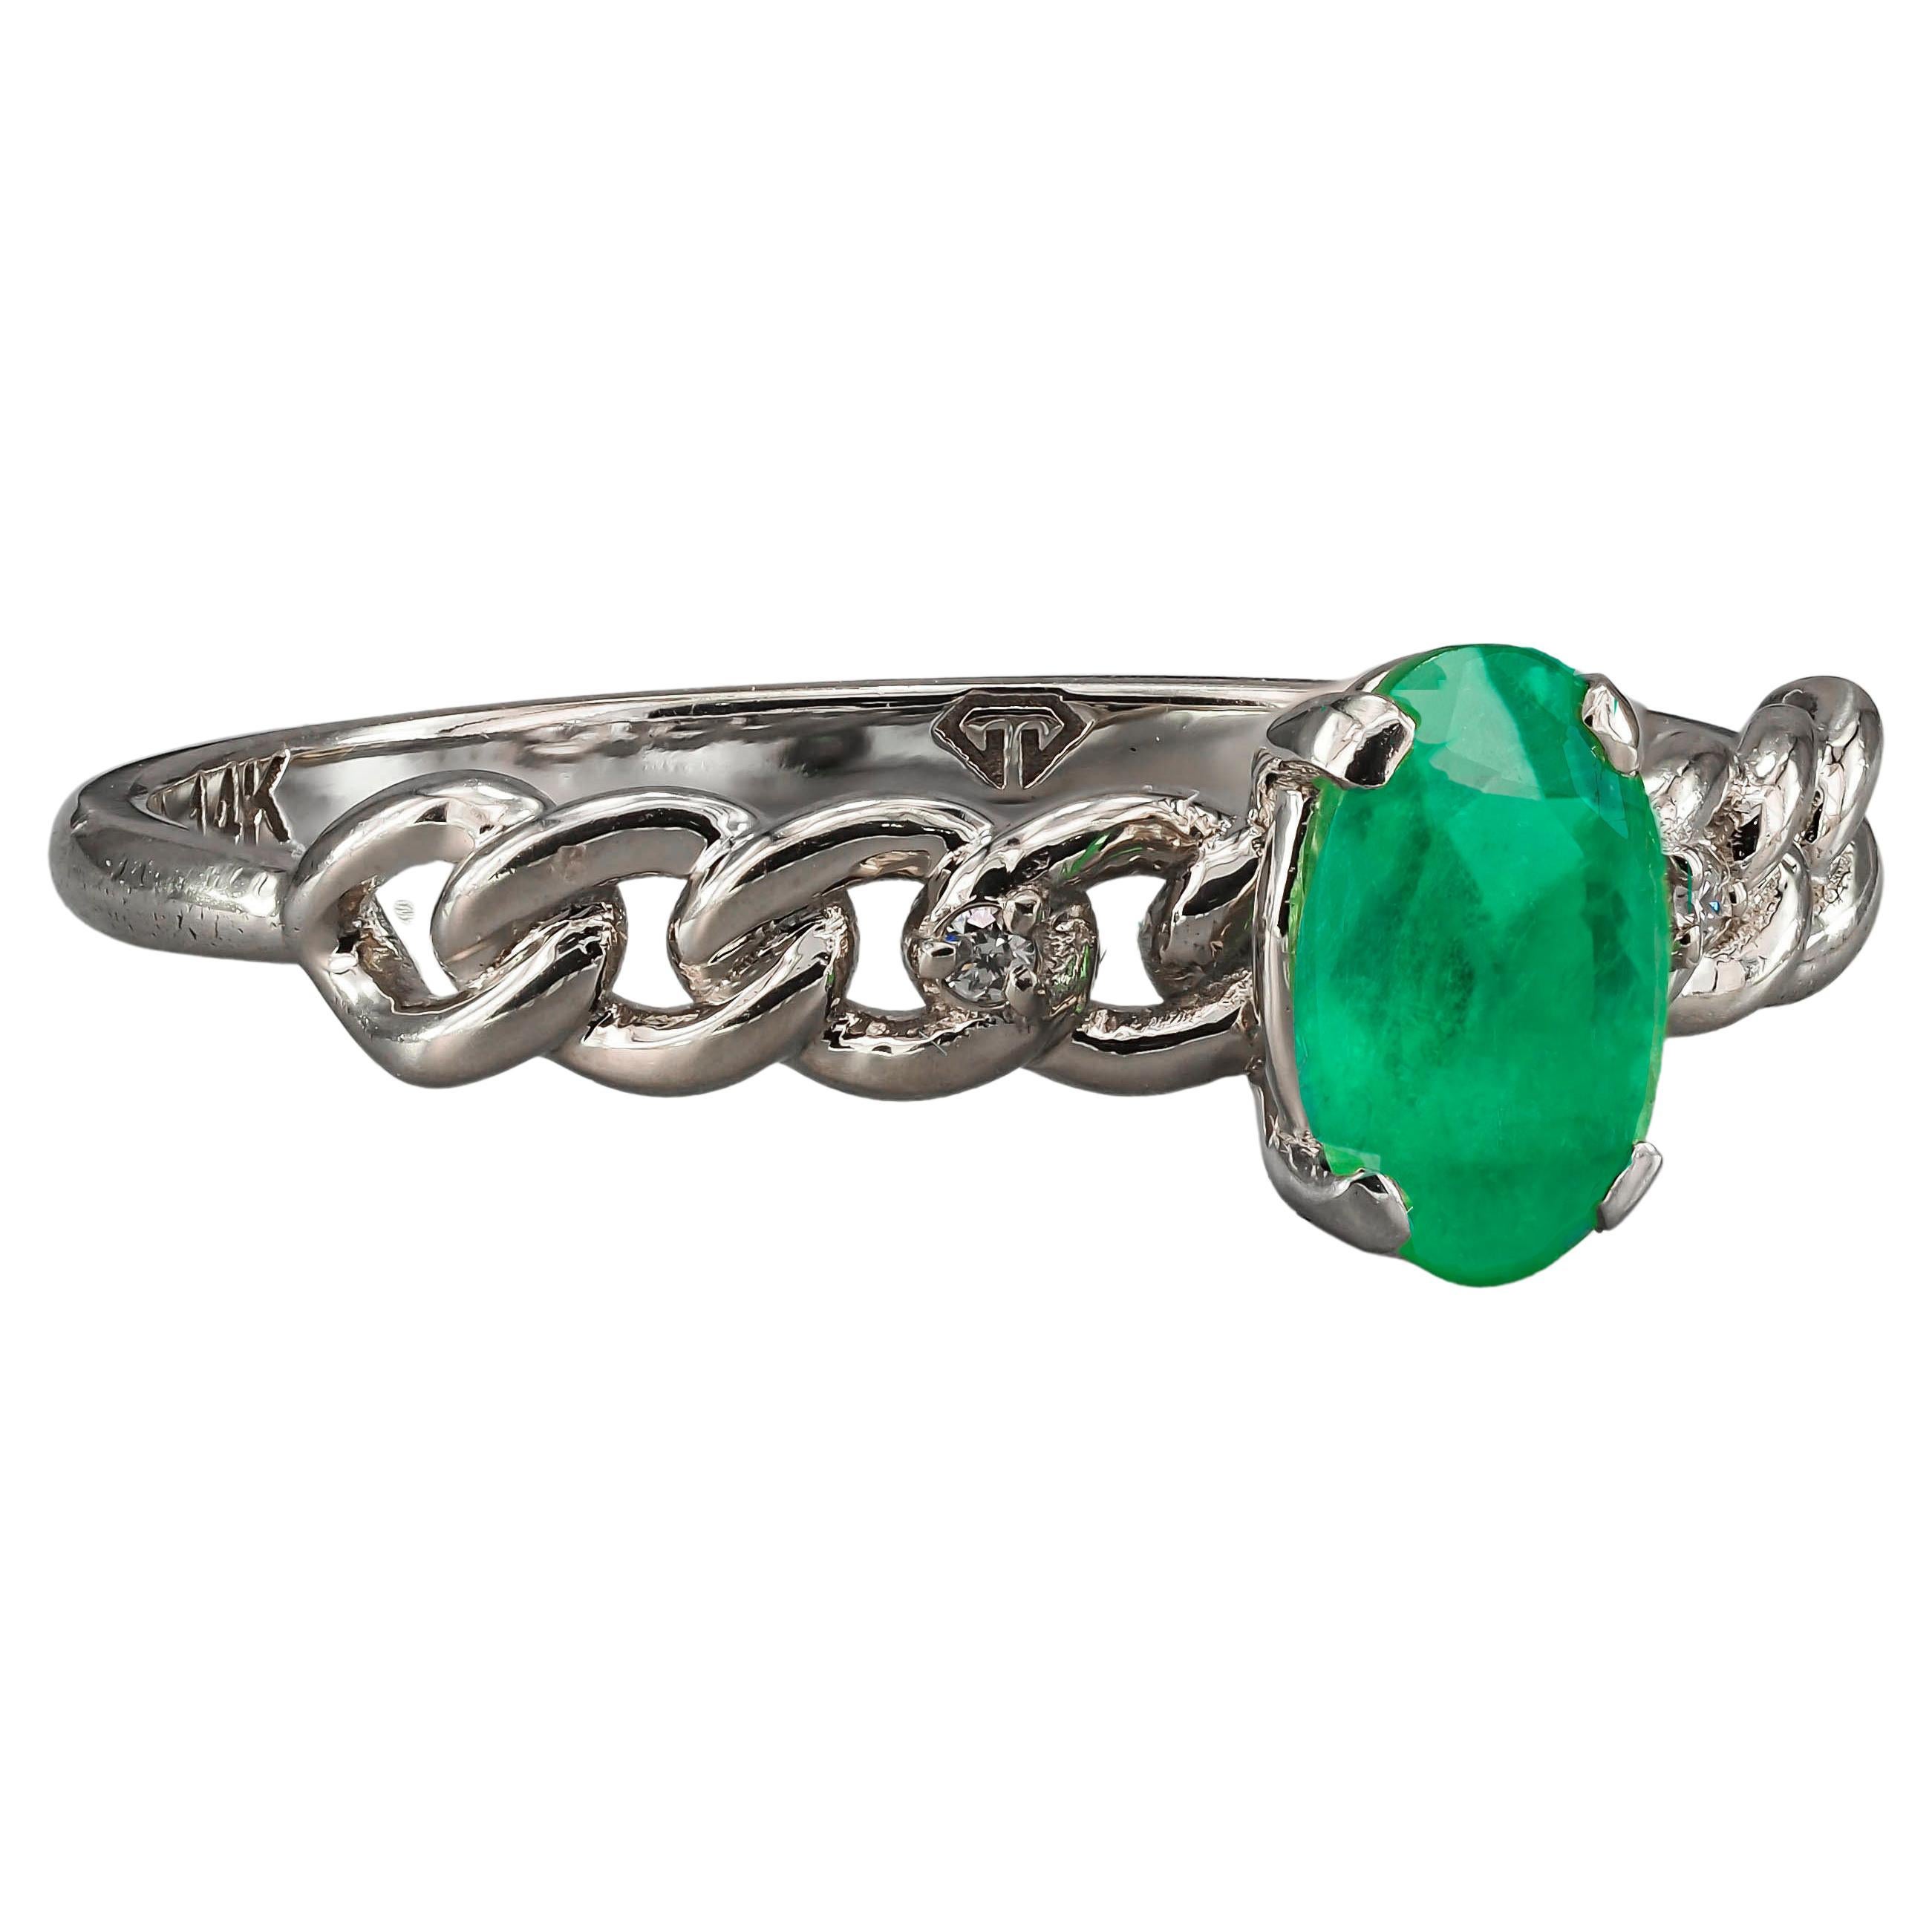 For Sale:  Emerald and diamonds 14k gold ring. Oval emerald gold ring.